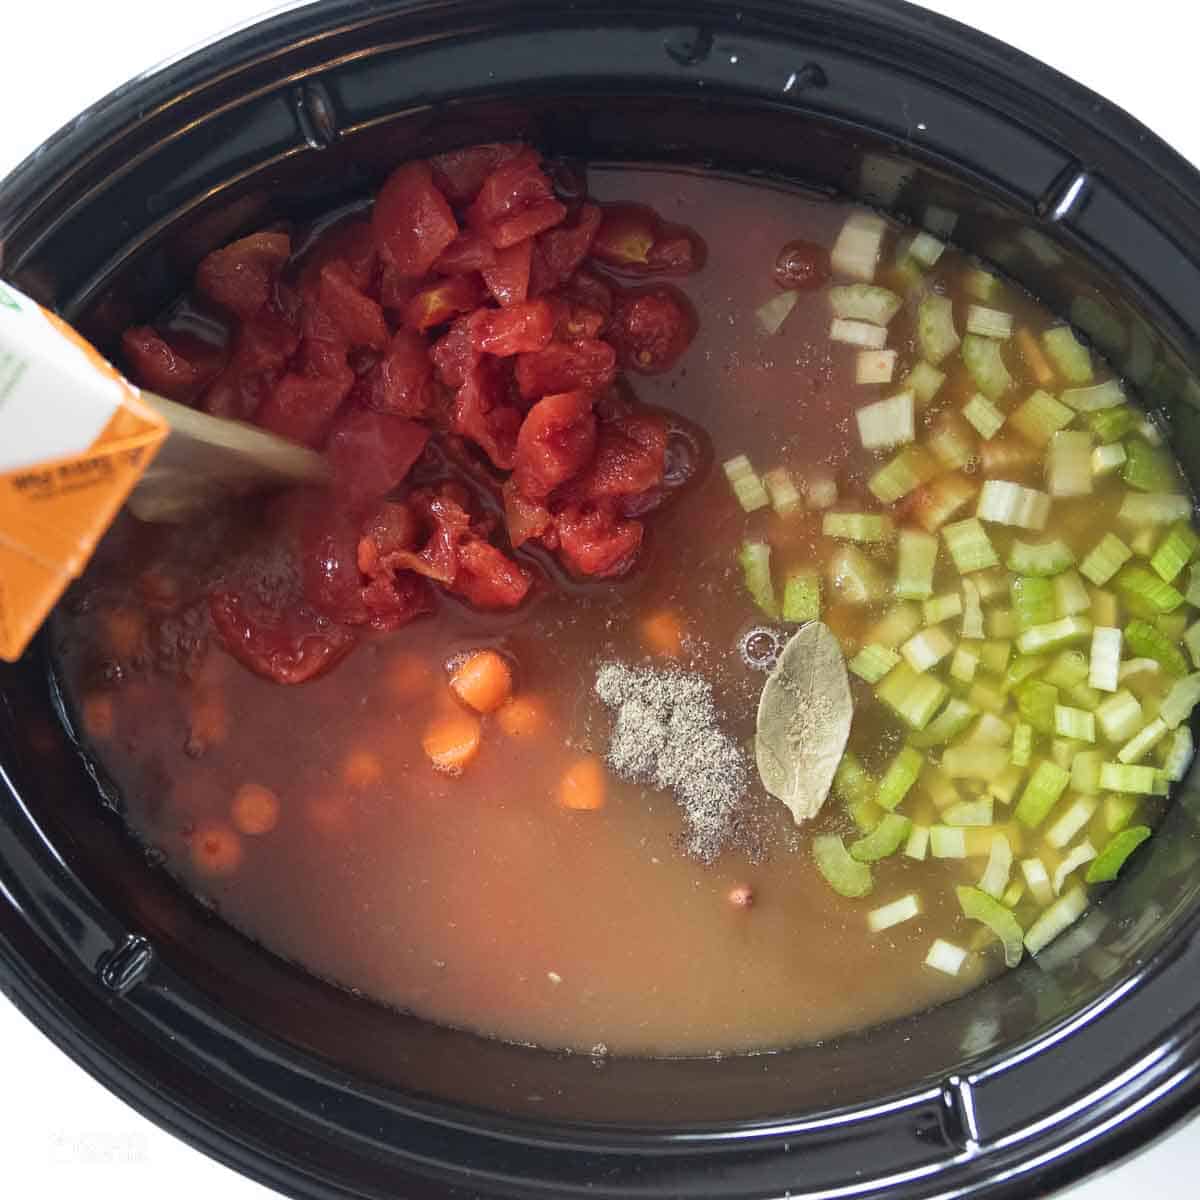 broth poured into crockpot on top of vegetables and beans